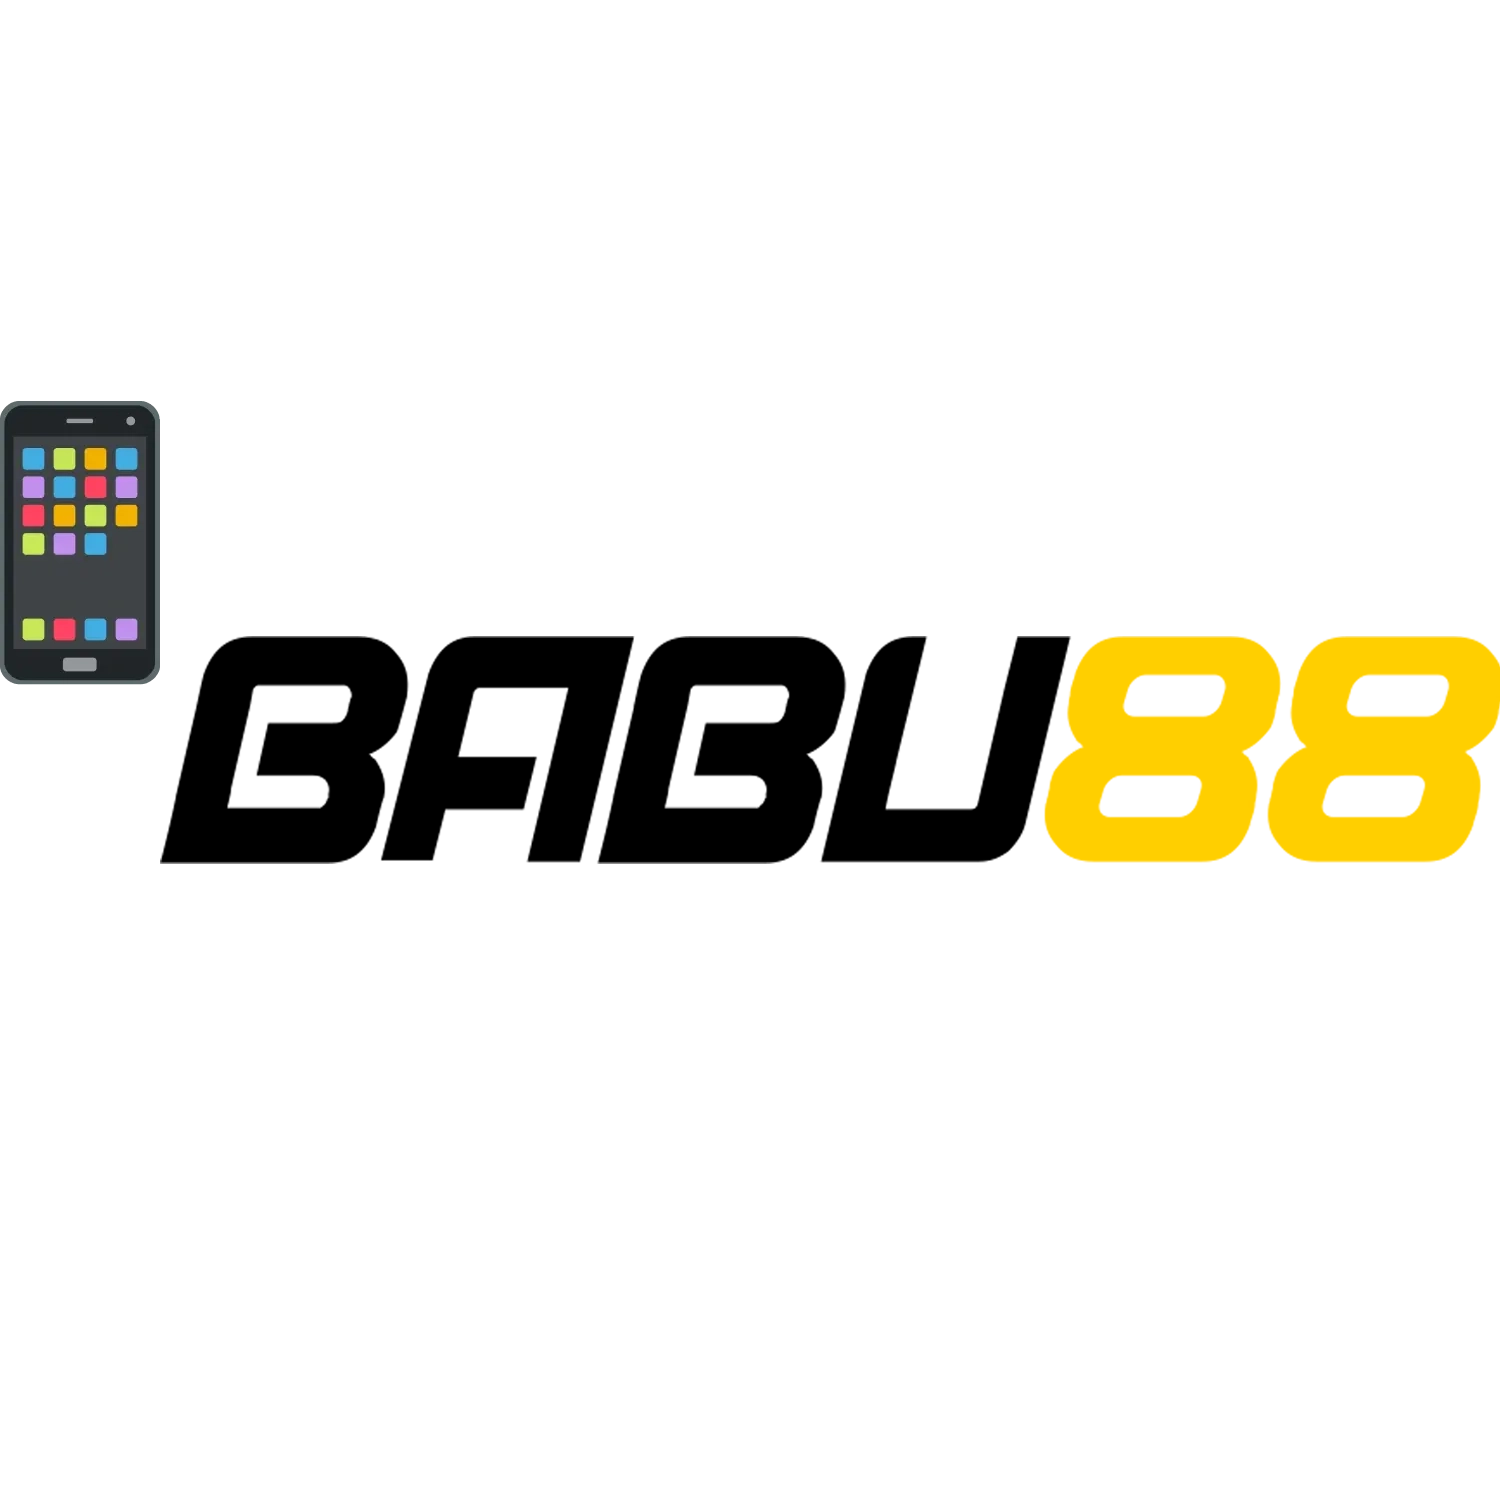 You'll find a huge number of slots and games on the app from Babu88.